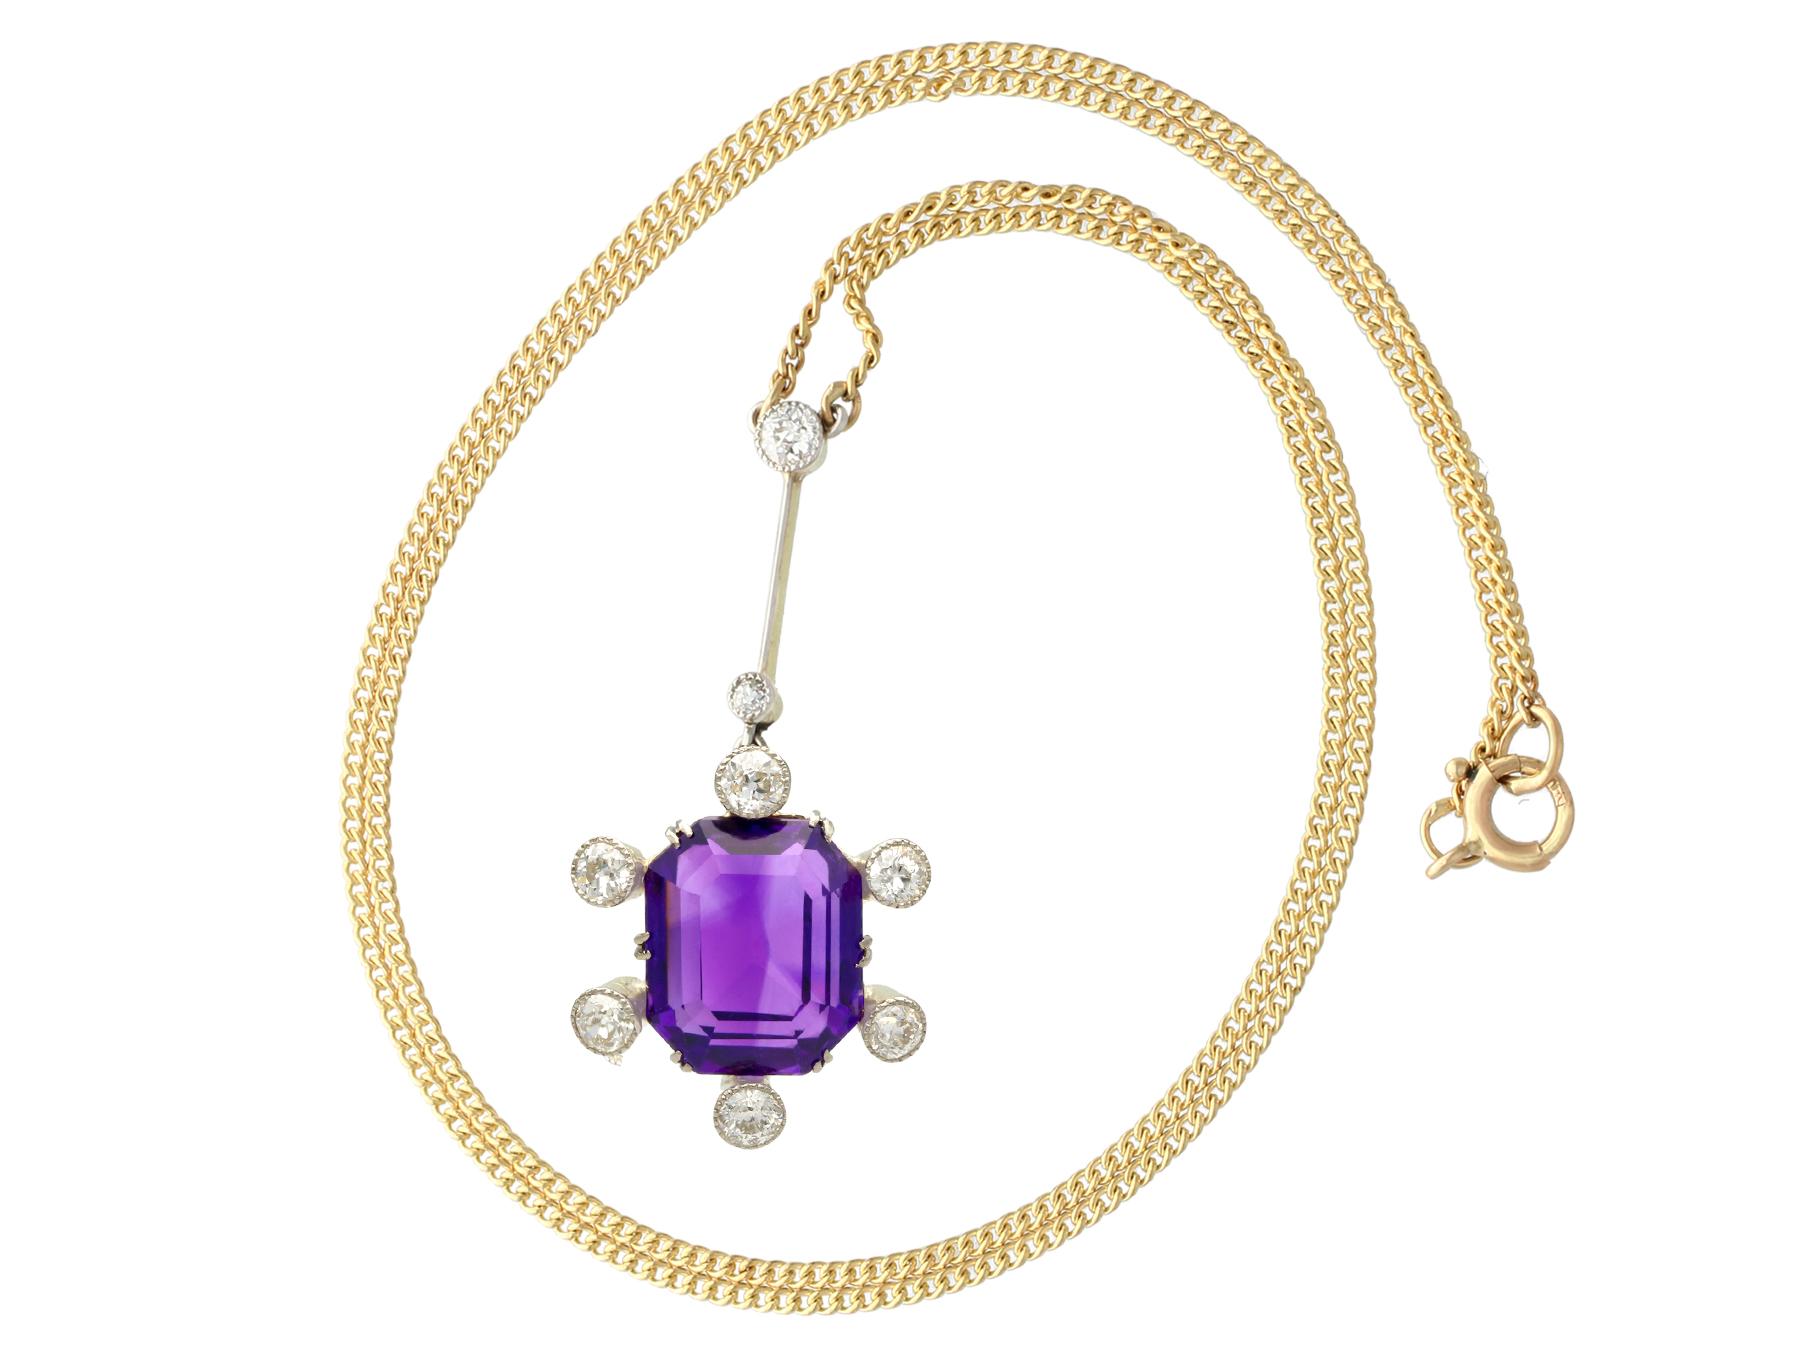 A stunning, fine, and impressive 7.13 carat amethyst and 1.06 carat diamond pendant; part of our diverse antique jewelry collections.

This fine and impressive amethyst pendant has been crafted in 9k yellow gold with a palladium setting and 9k